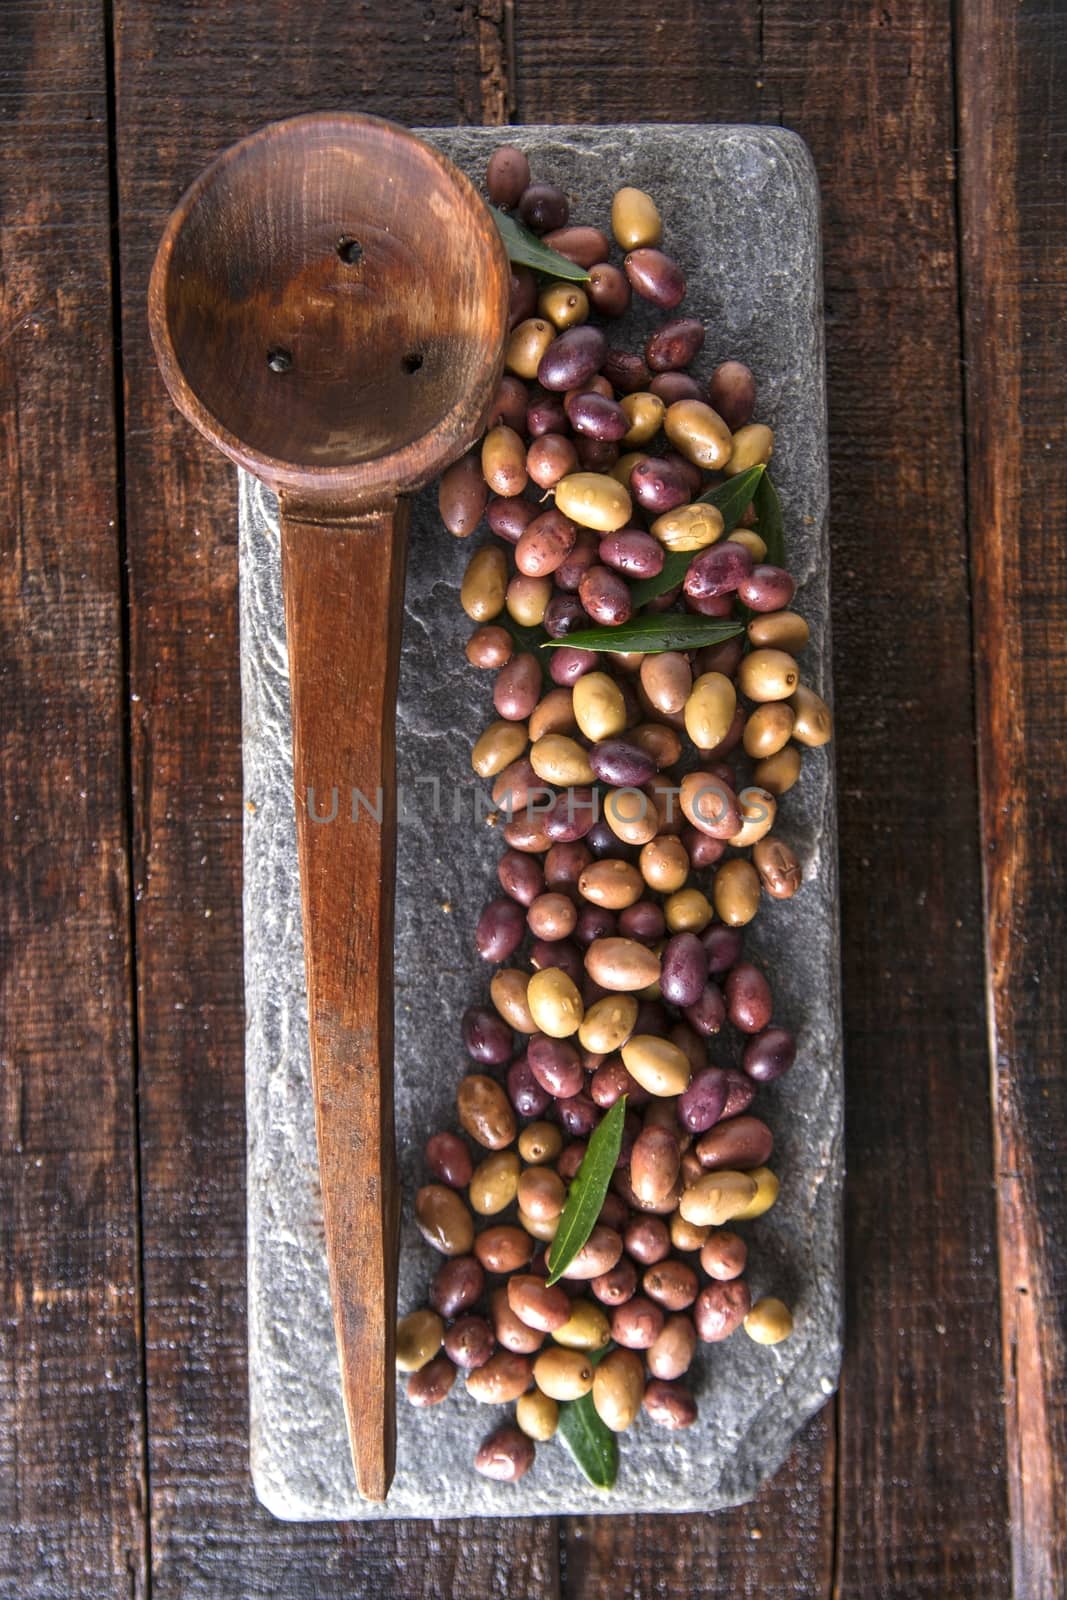 Aperitif with mixed olives in brine of Tuscany Italy